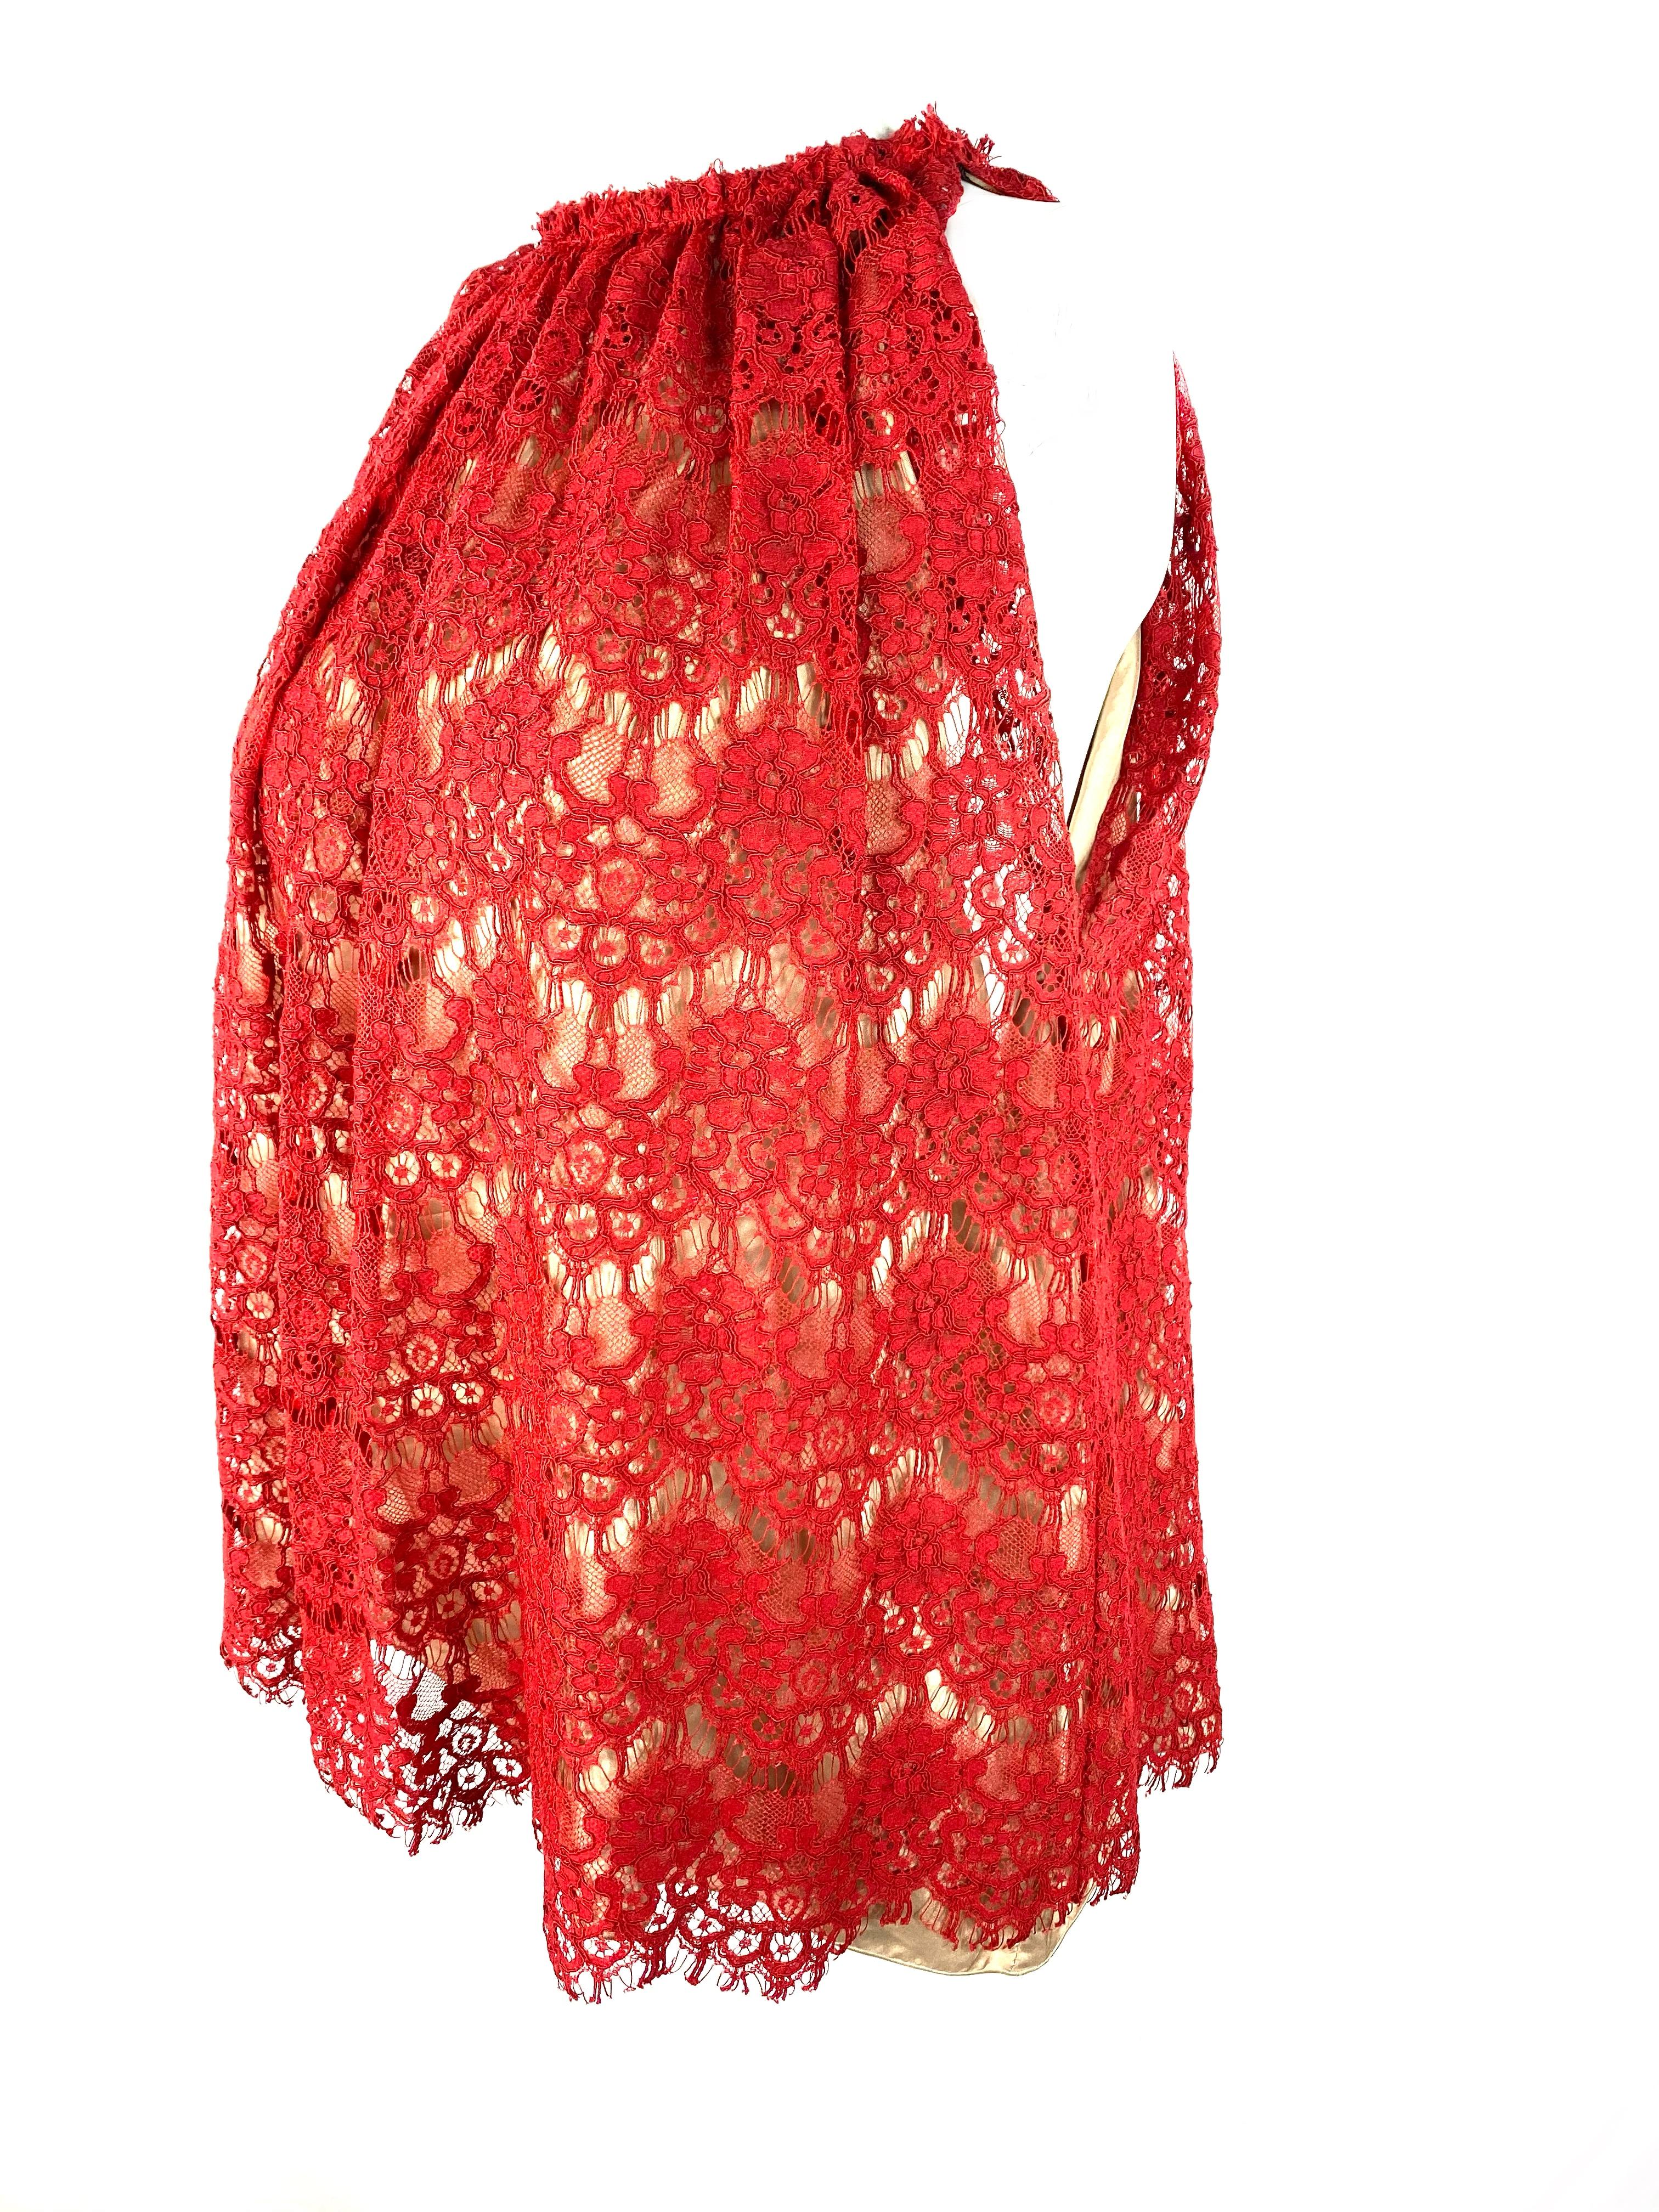 Lanvin Paris Red Lace Top, Size 38 In Excellent Condition For Sale In Beverly Hills, CA